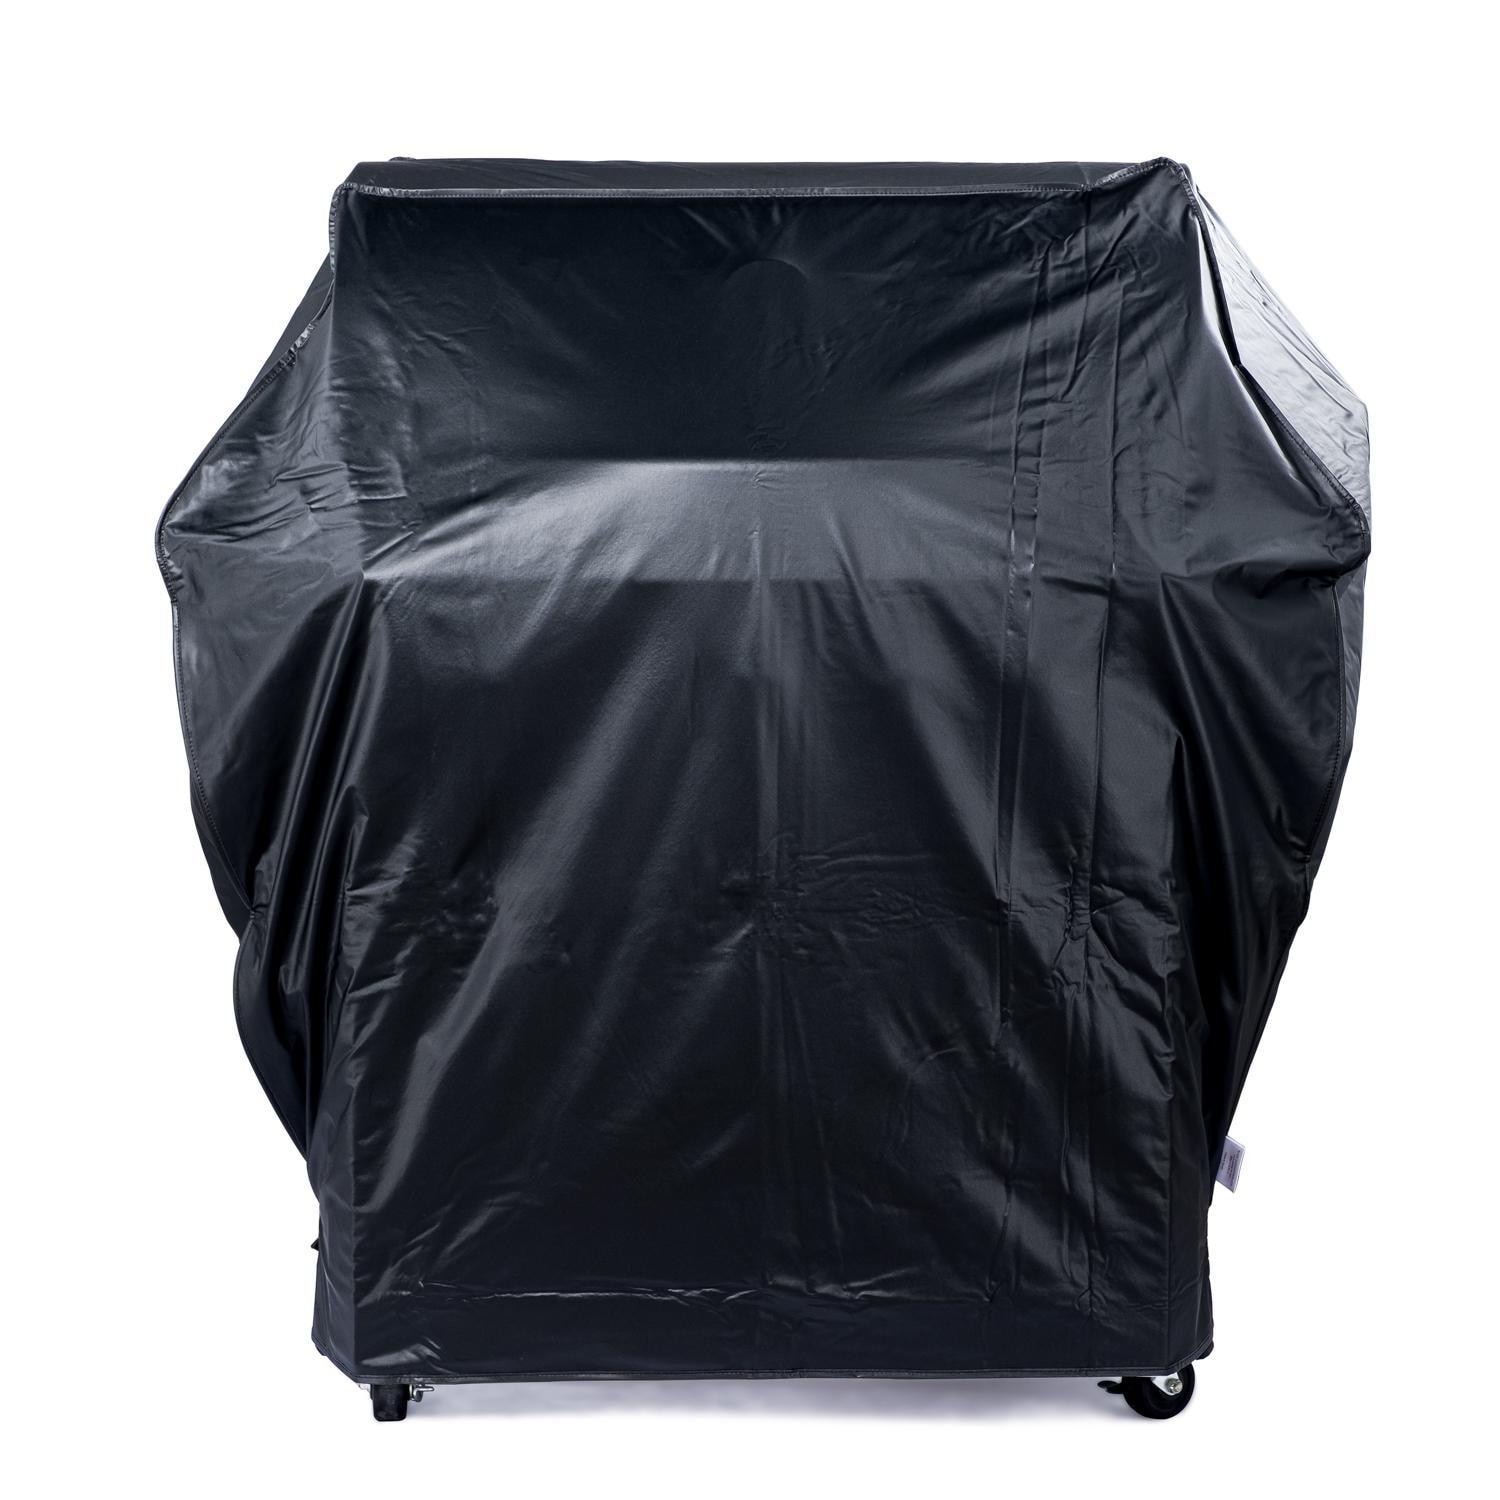 Blaze Grill Cover For Professional LUX 44-Inch Freestanding Gas Grills - 4PROCTCV - image 1 of 3